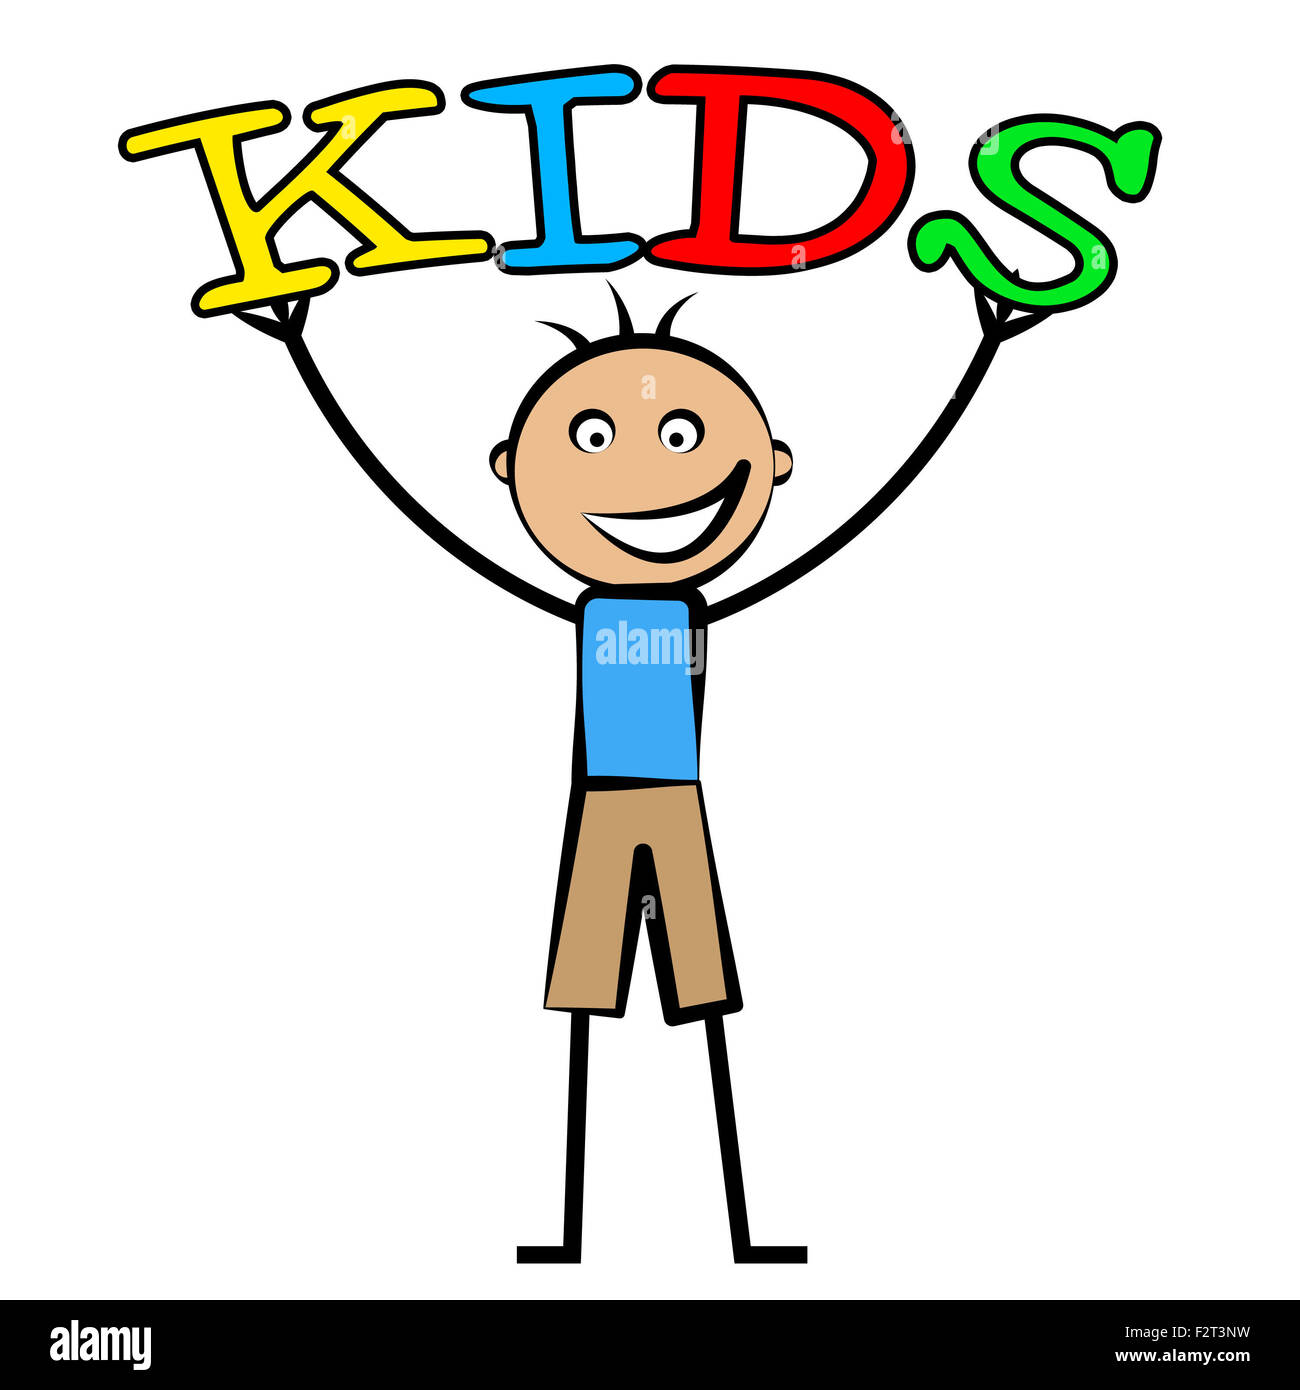 Kids Word Representing Youngsters Toddlers And Son Stock Photo